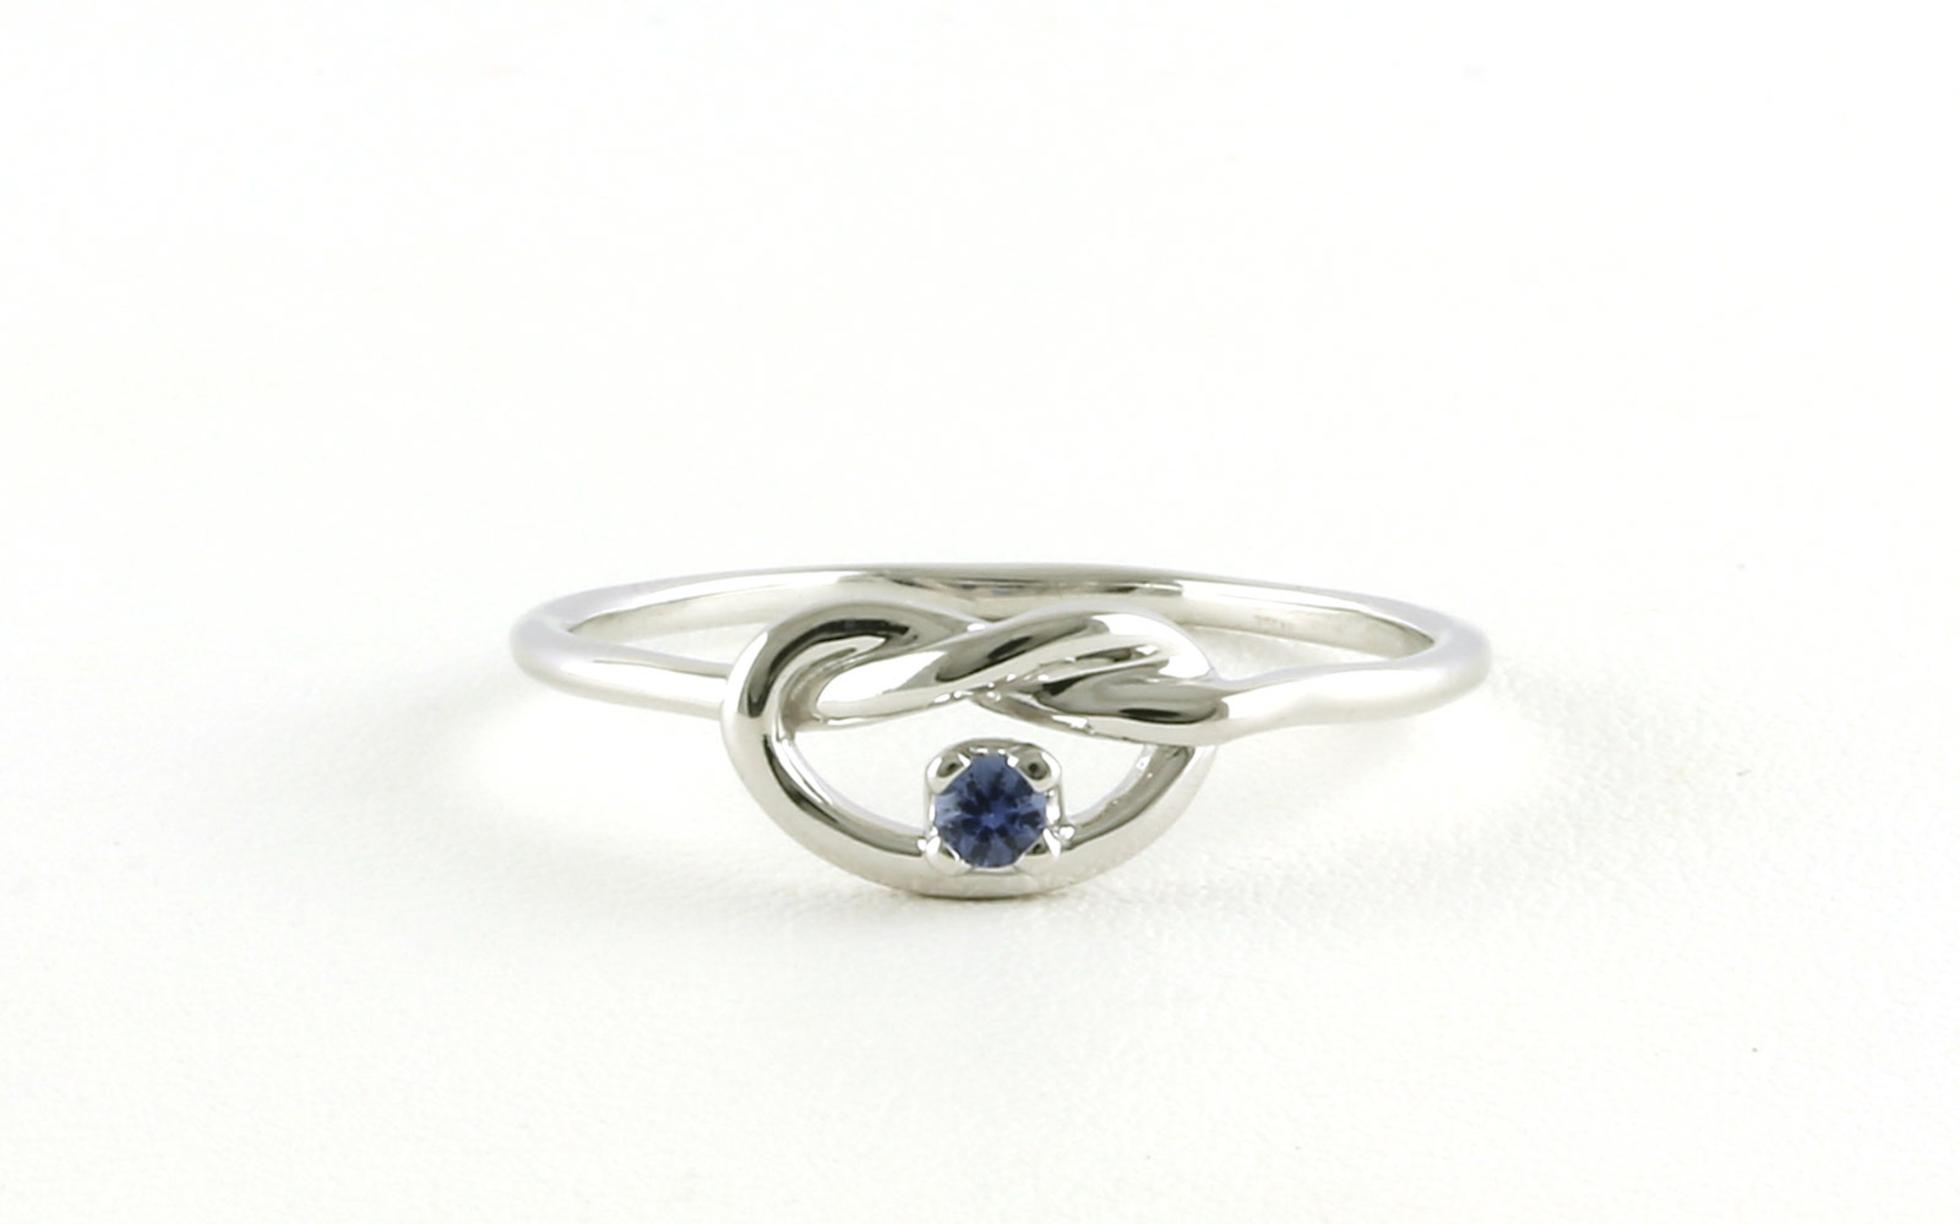 Knot Montana Yogo Sapphire Ring in Sterling Silver (0.05cts TWT)